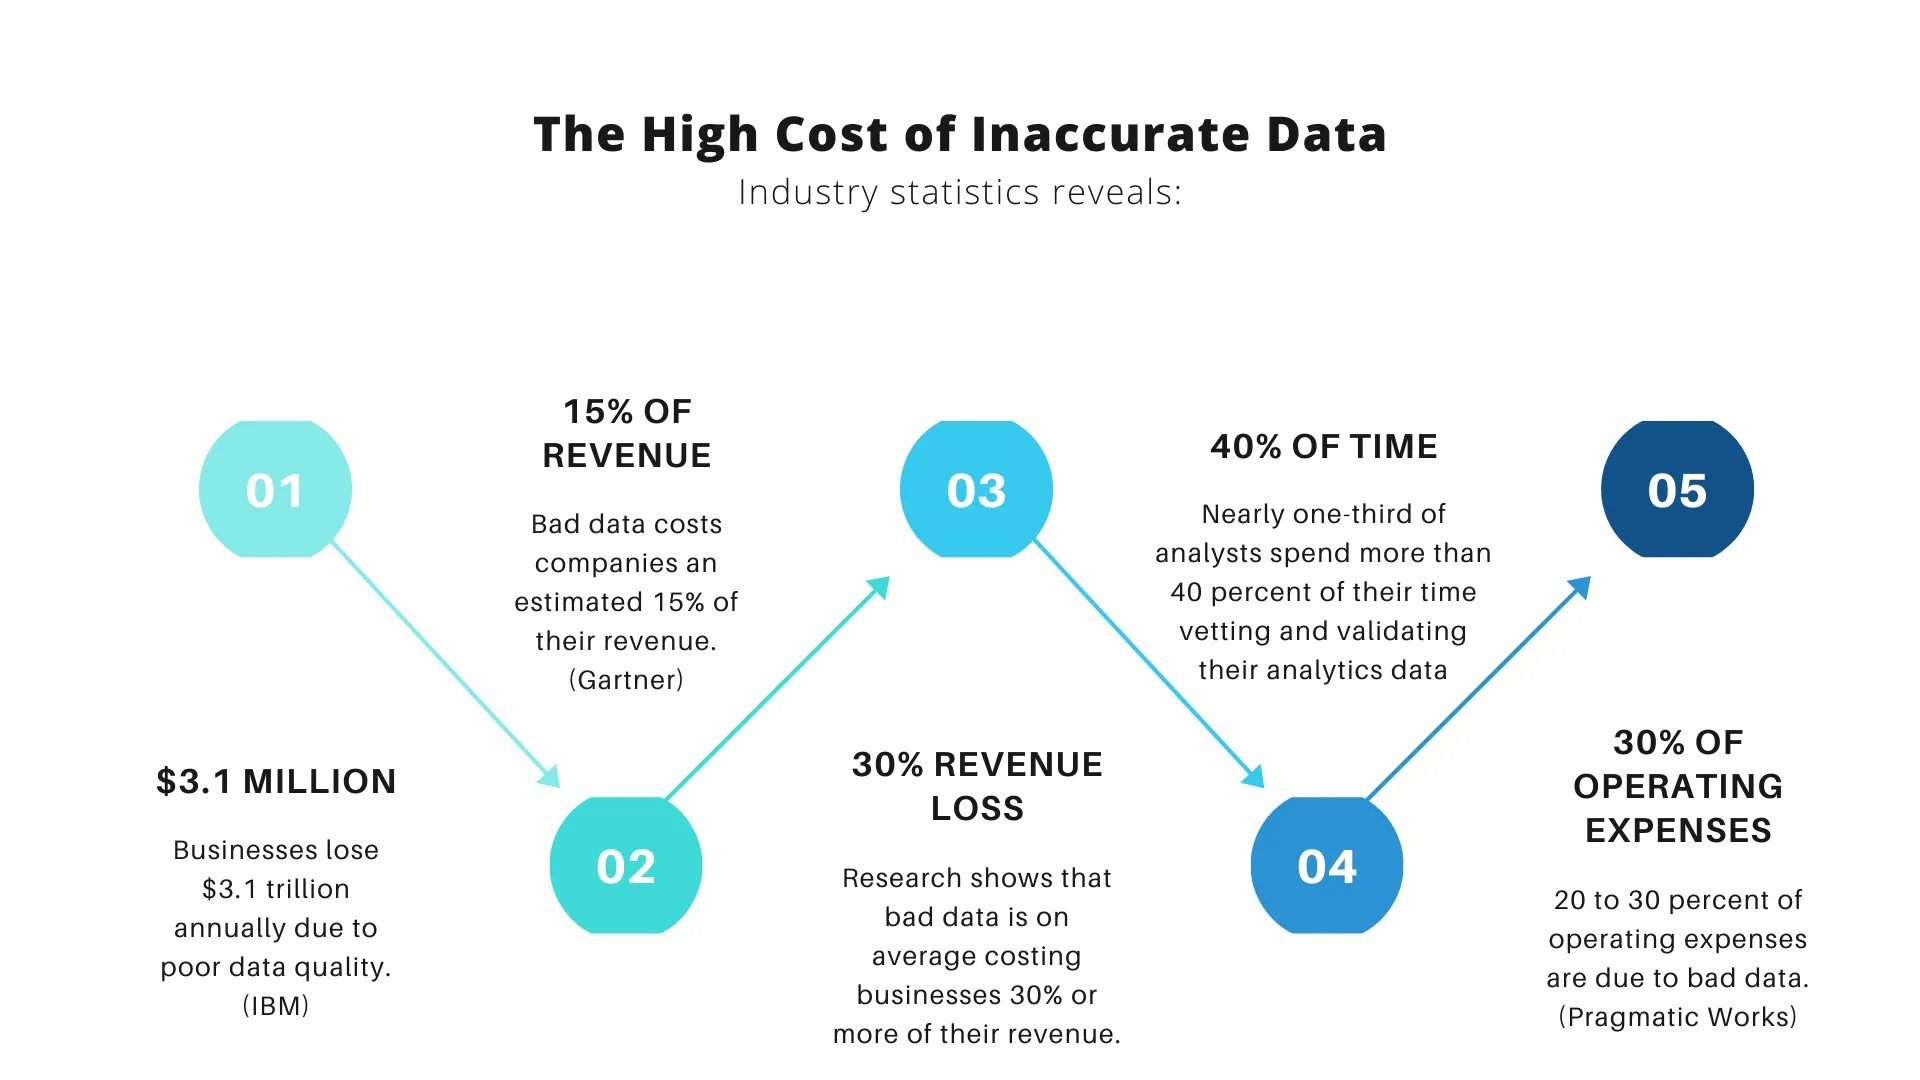 High Cost of Inaccurate Data